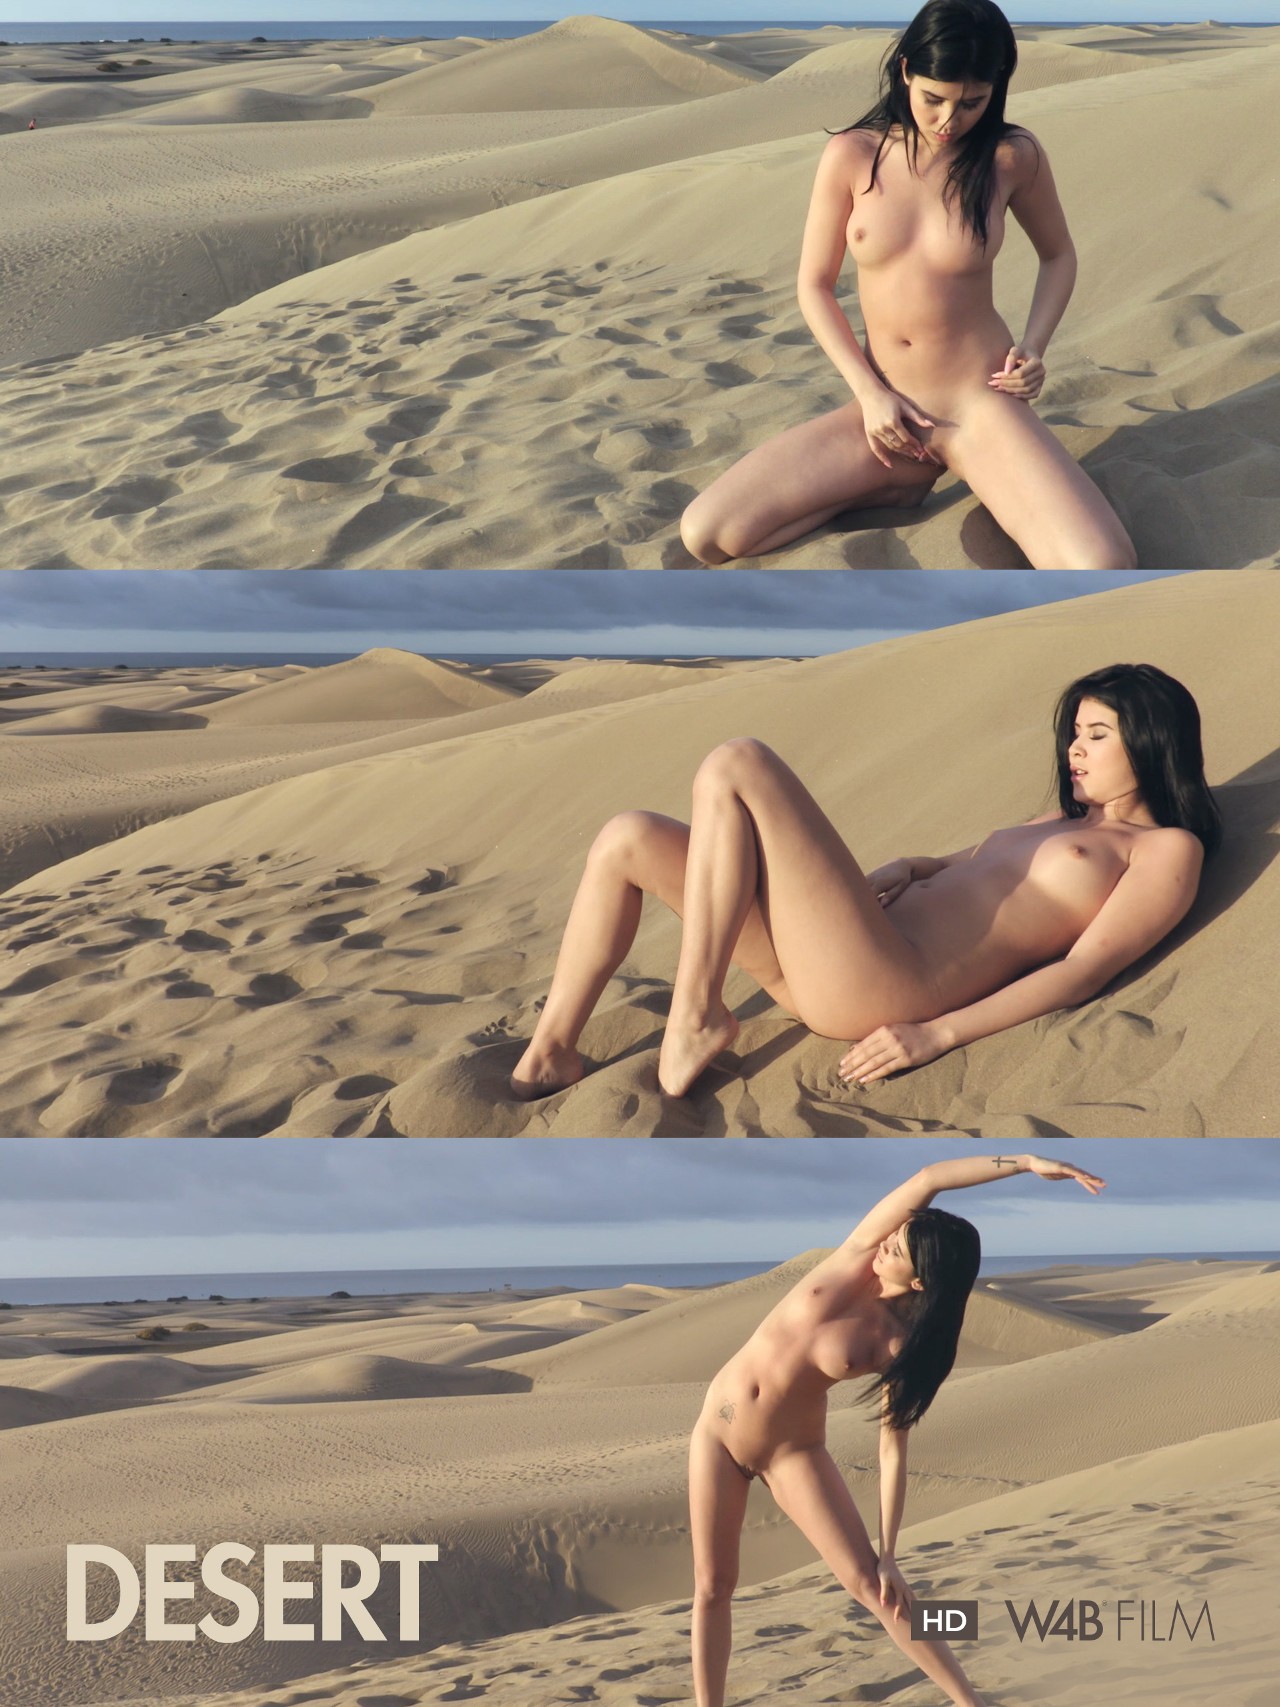 We brought naughty Lady Dee to the dunes of Gran Canaria. She absolutely loved it! She felt so wild, masturbating there. Enjoy!